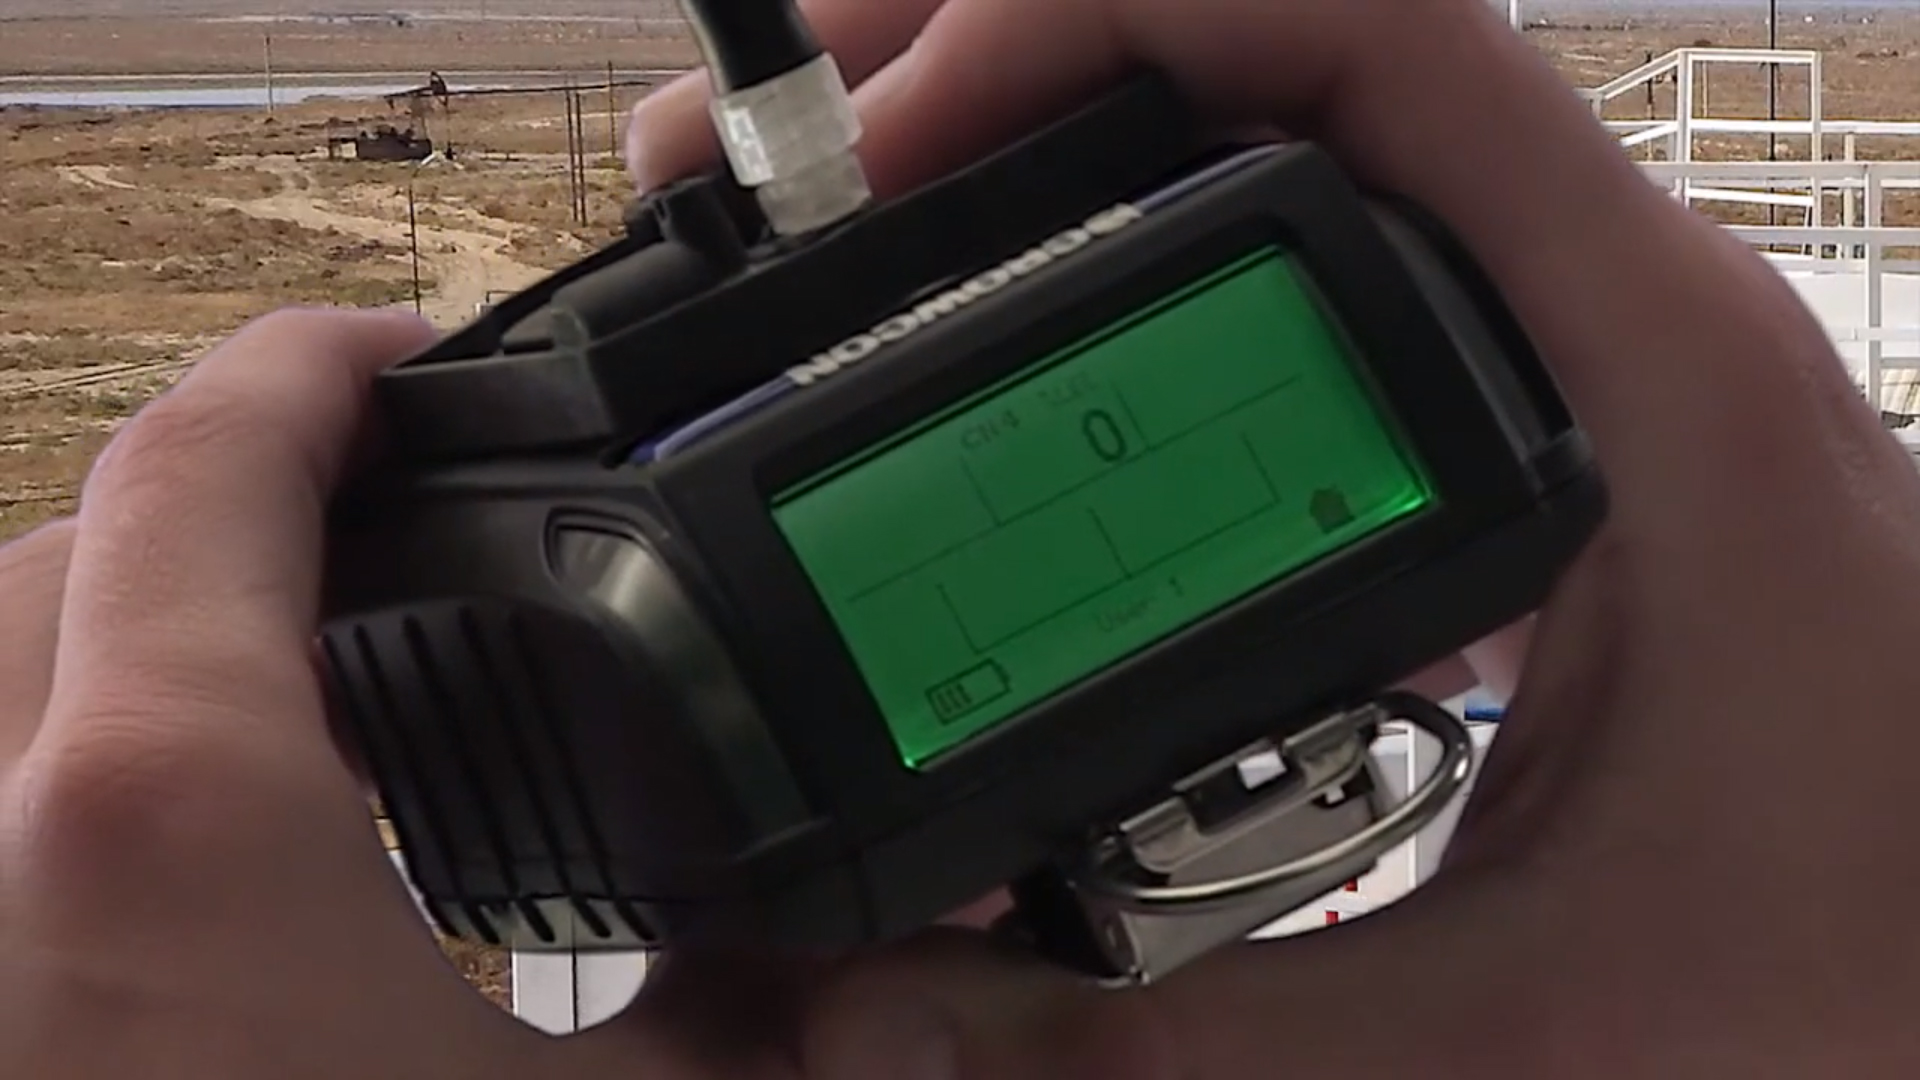 A close up of the Crowcon Gas Pro TK MED Personal Gas Detector being used in the field.